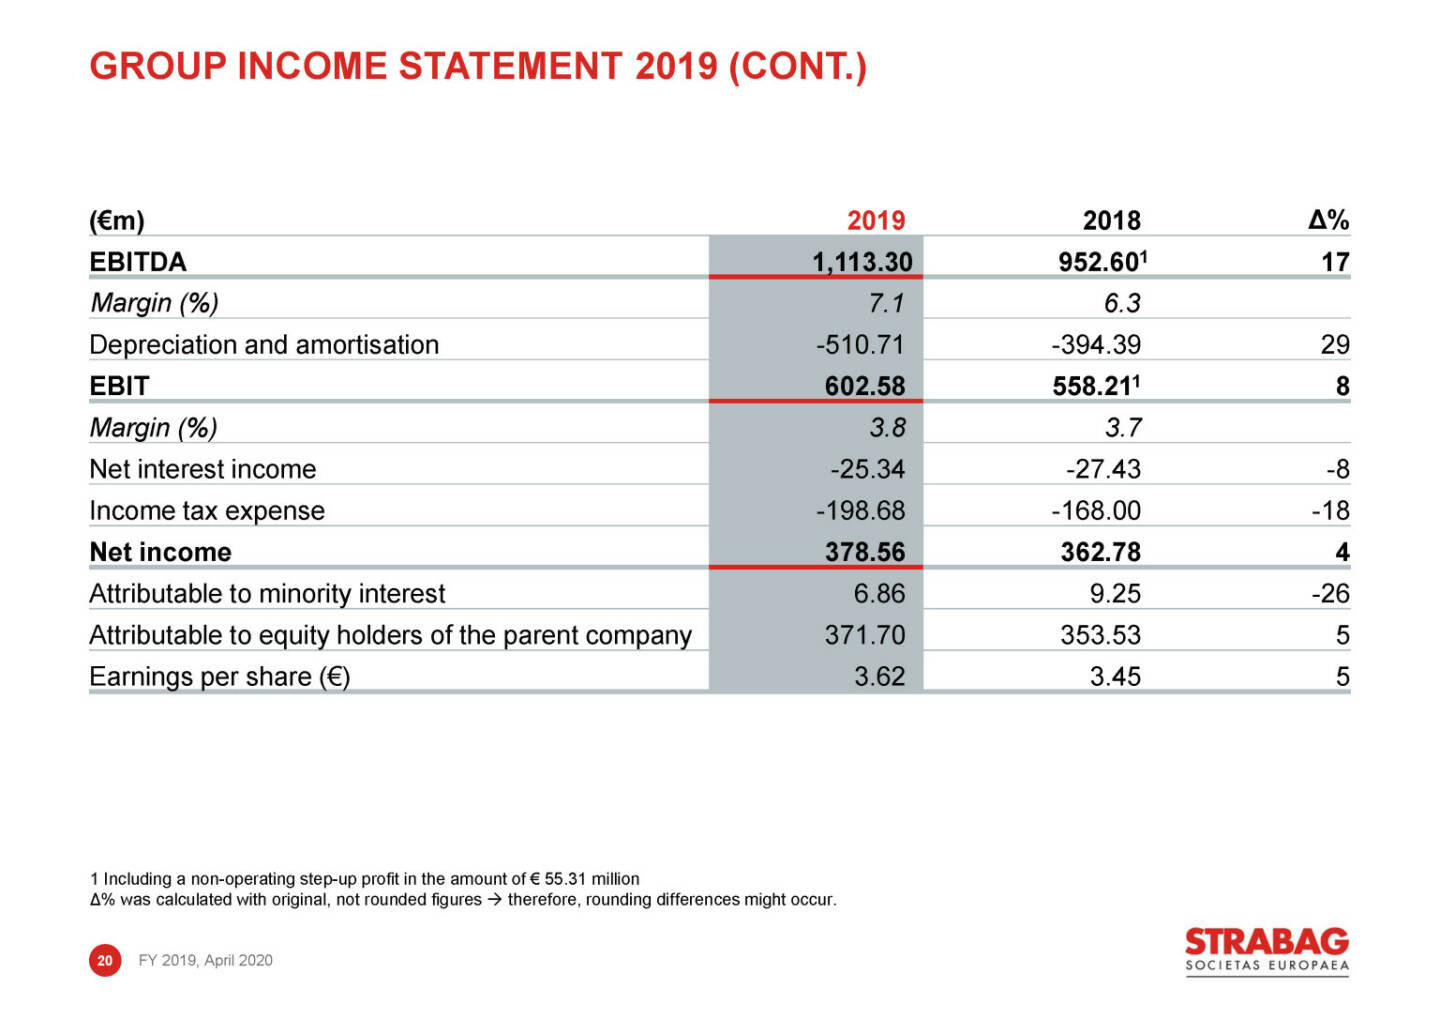 Strabag - group income statement 2019 (cont.)